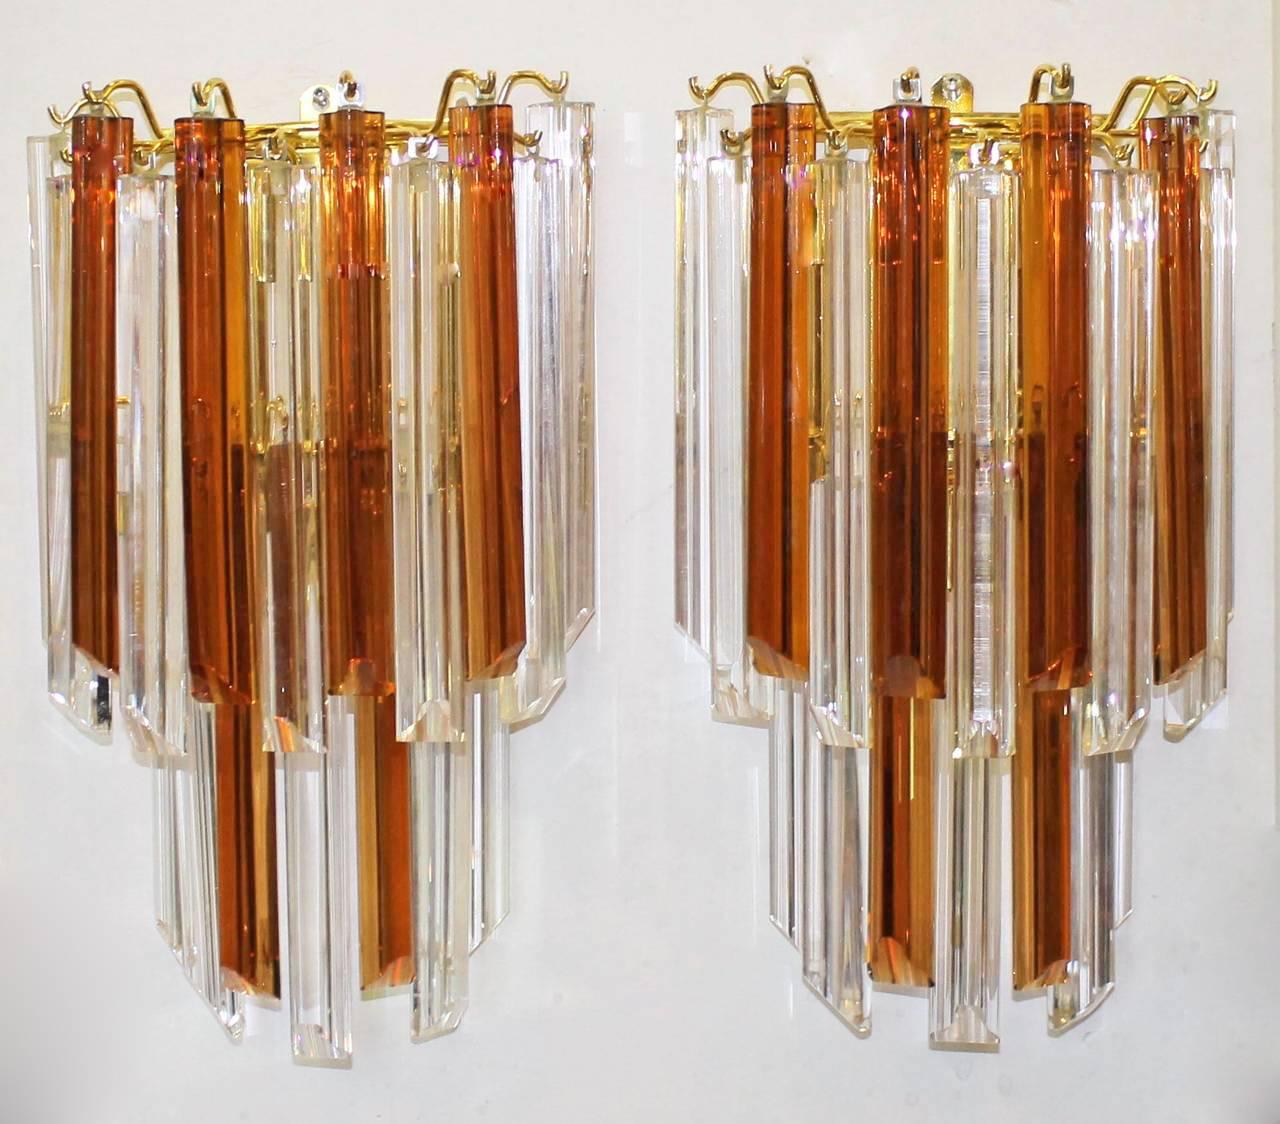 Pair of large Italian Venini style triedi prism wall sconces in burnt sienna and clear crystal glass with gold-plated back plates. Each sconce uses 3 - 40 watt candelabra base bulbs. Newly wired for US.

Measures: 17